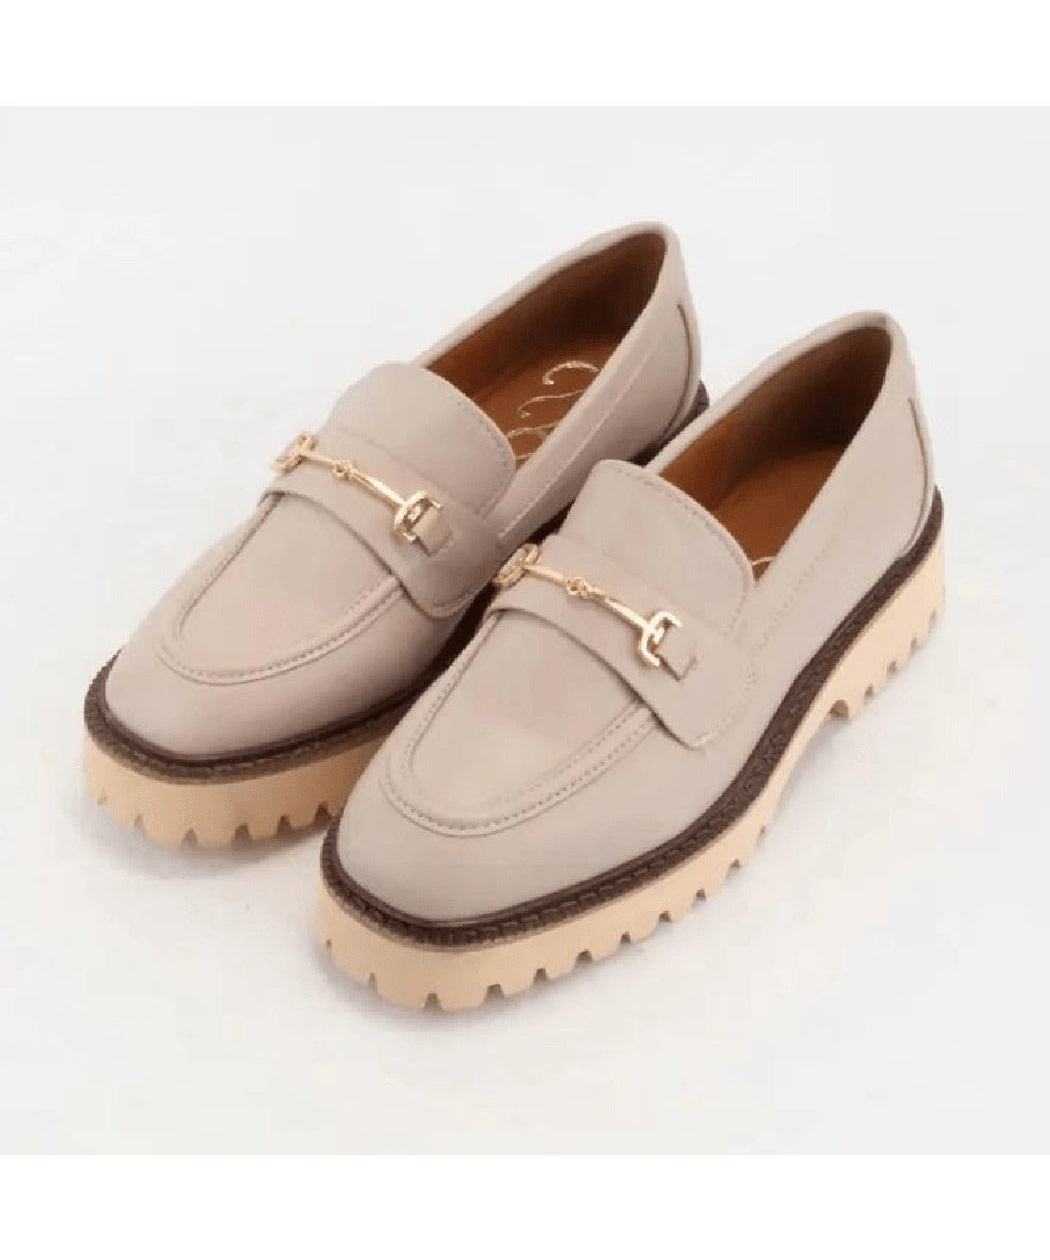 Megan Lug Sole Loafer by CCOCCI - Taupe - Blue Sky Fashions & Lingerie